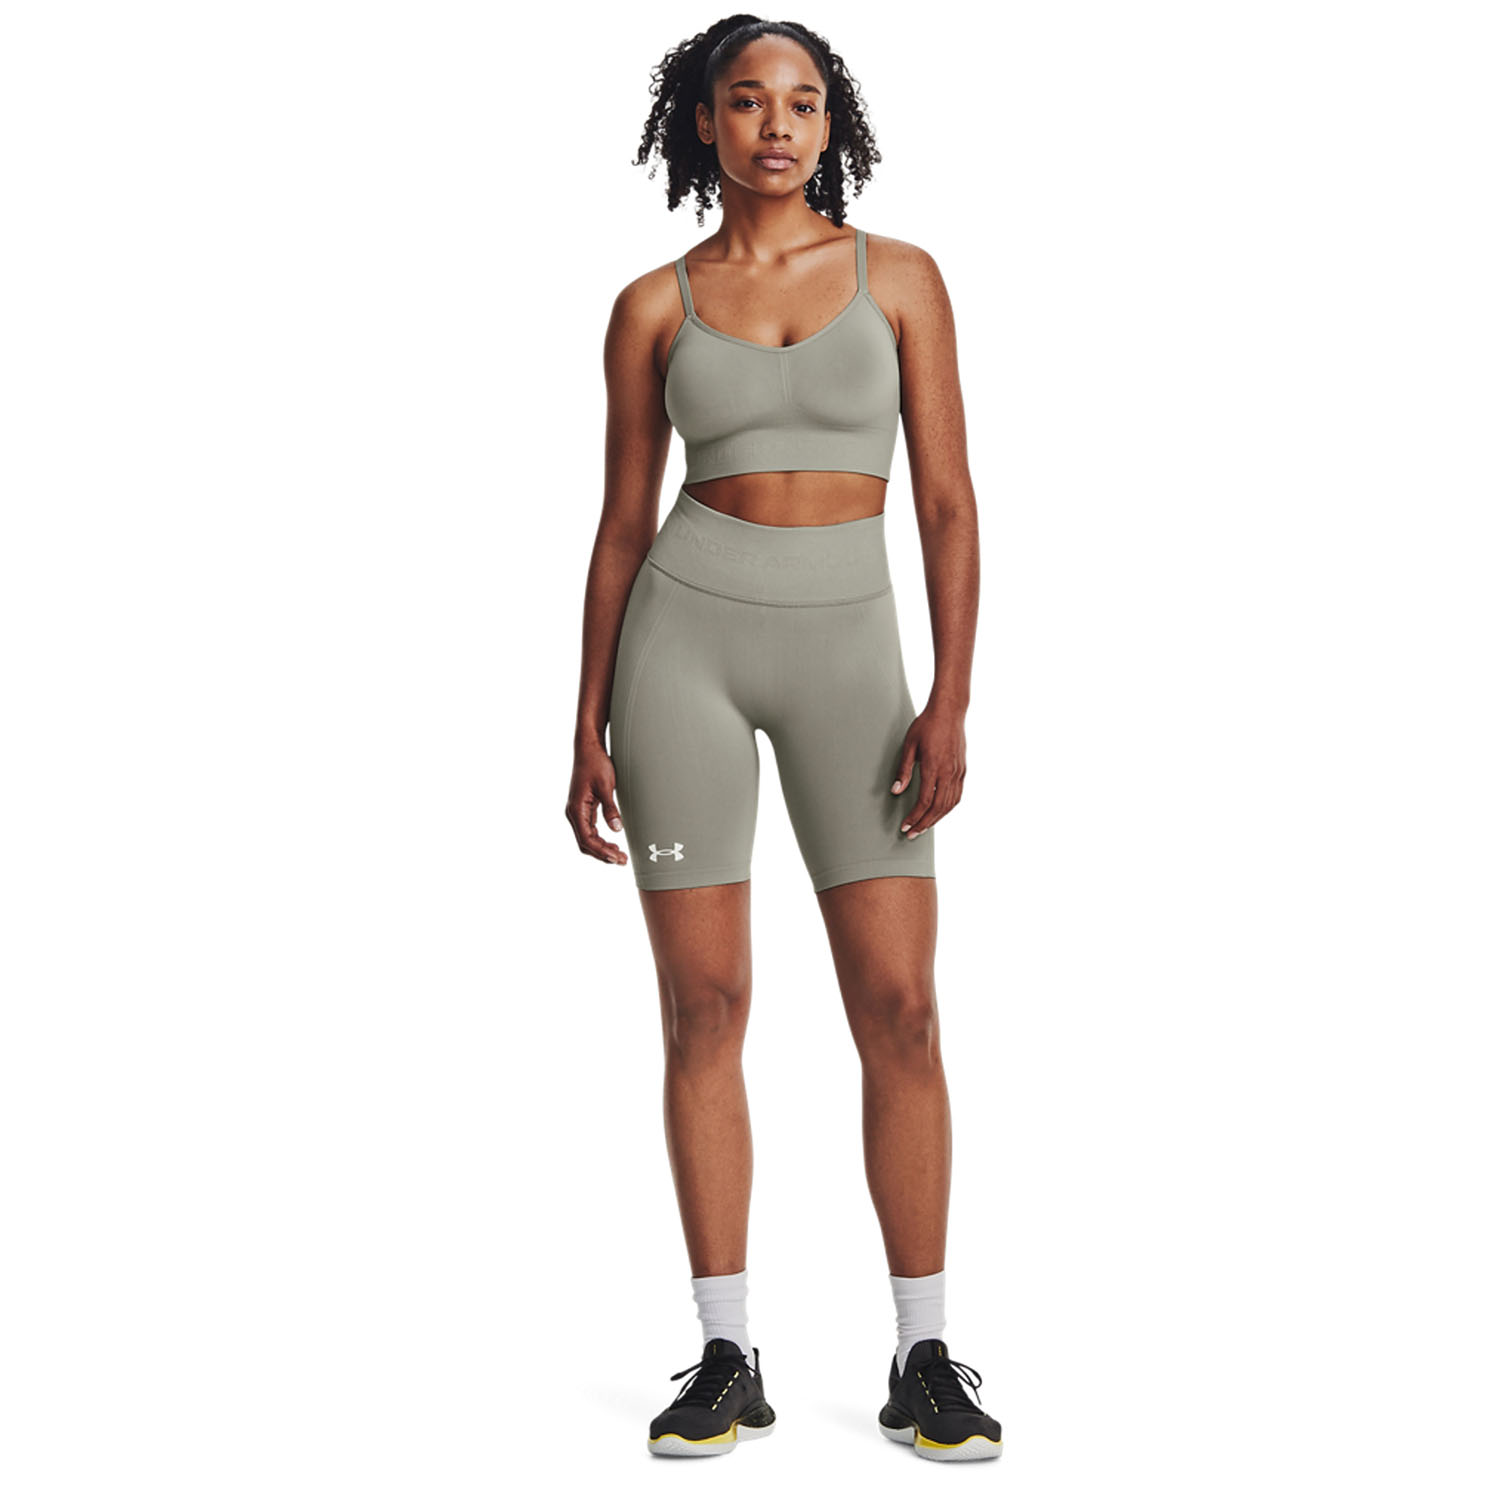 Under Armour Seamless 7in Pantaloncini - Grove Green